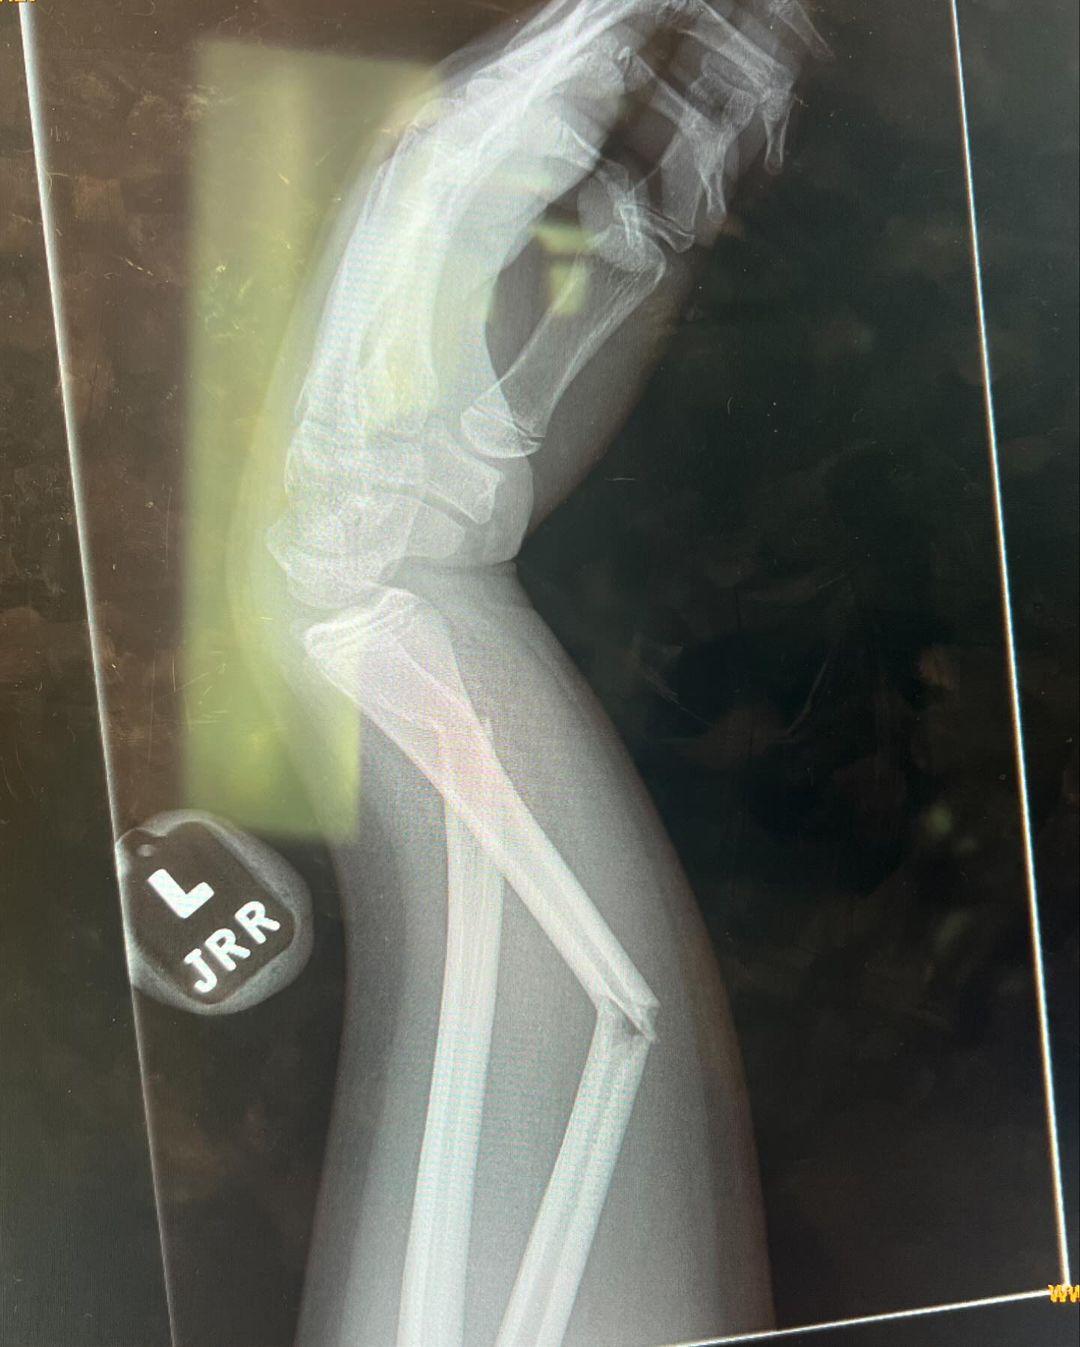 Kourtney Kardashian’s fans are asking questions about mysterious X-ray photo